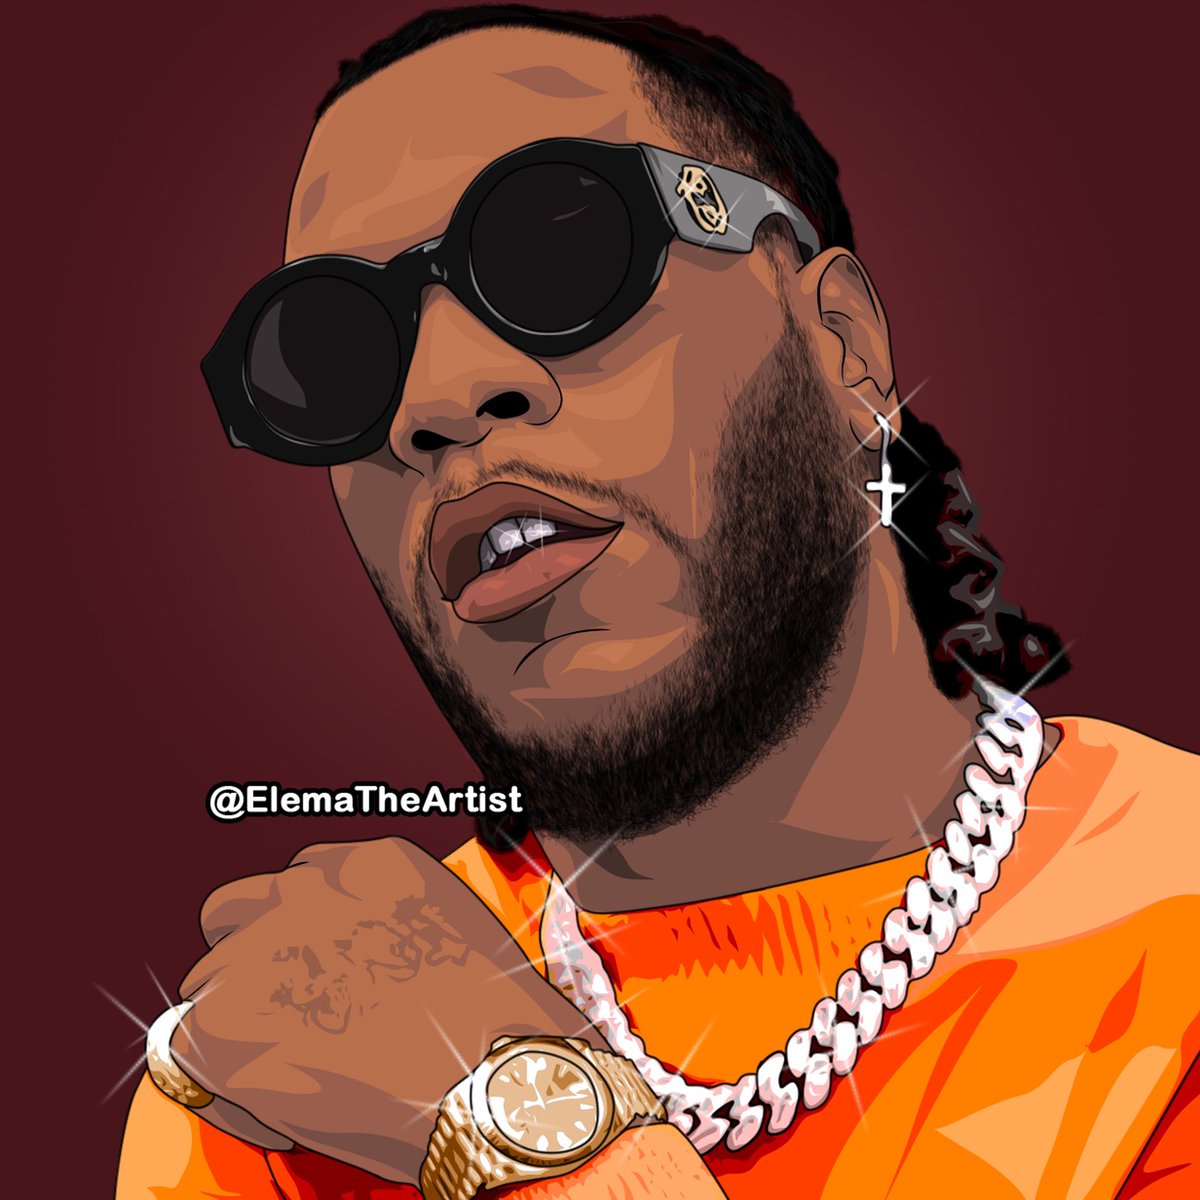 Here's a HD Cartoon Picture of the talented singer and Grammy winner, Burnaboy (@burnaboy). Beautiful, right? Rt so others can see it too🖌️